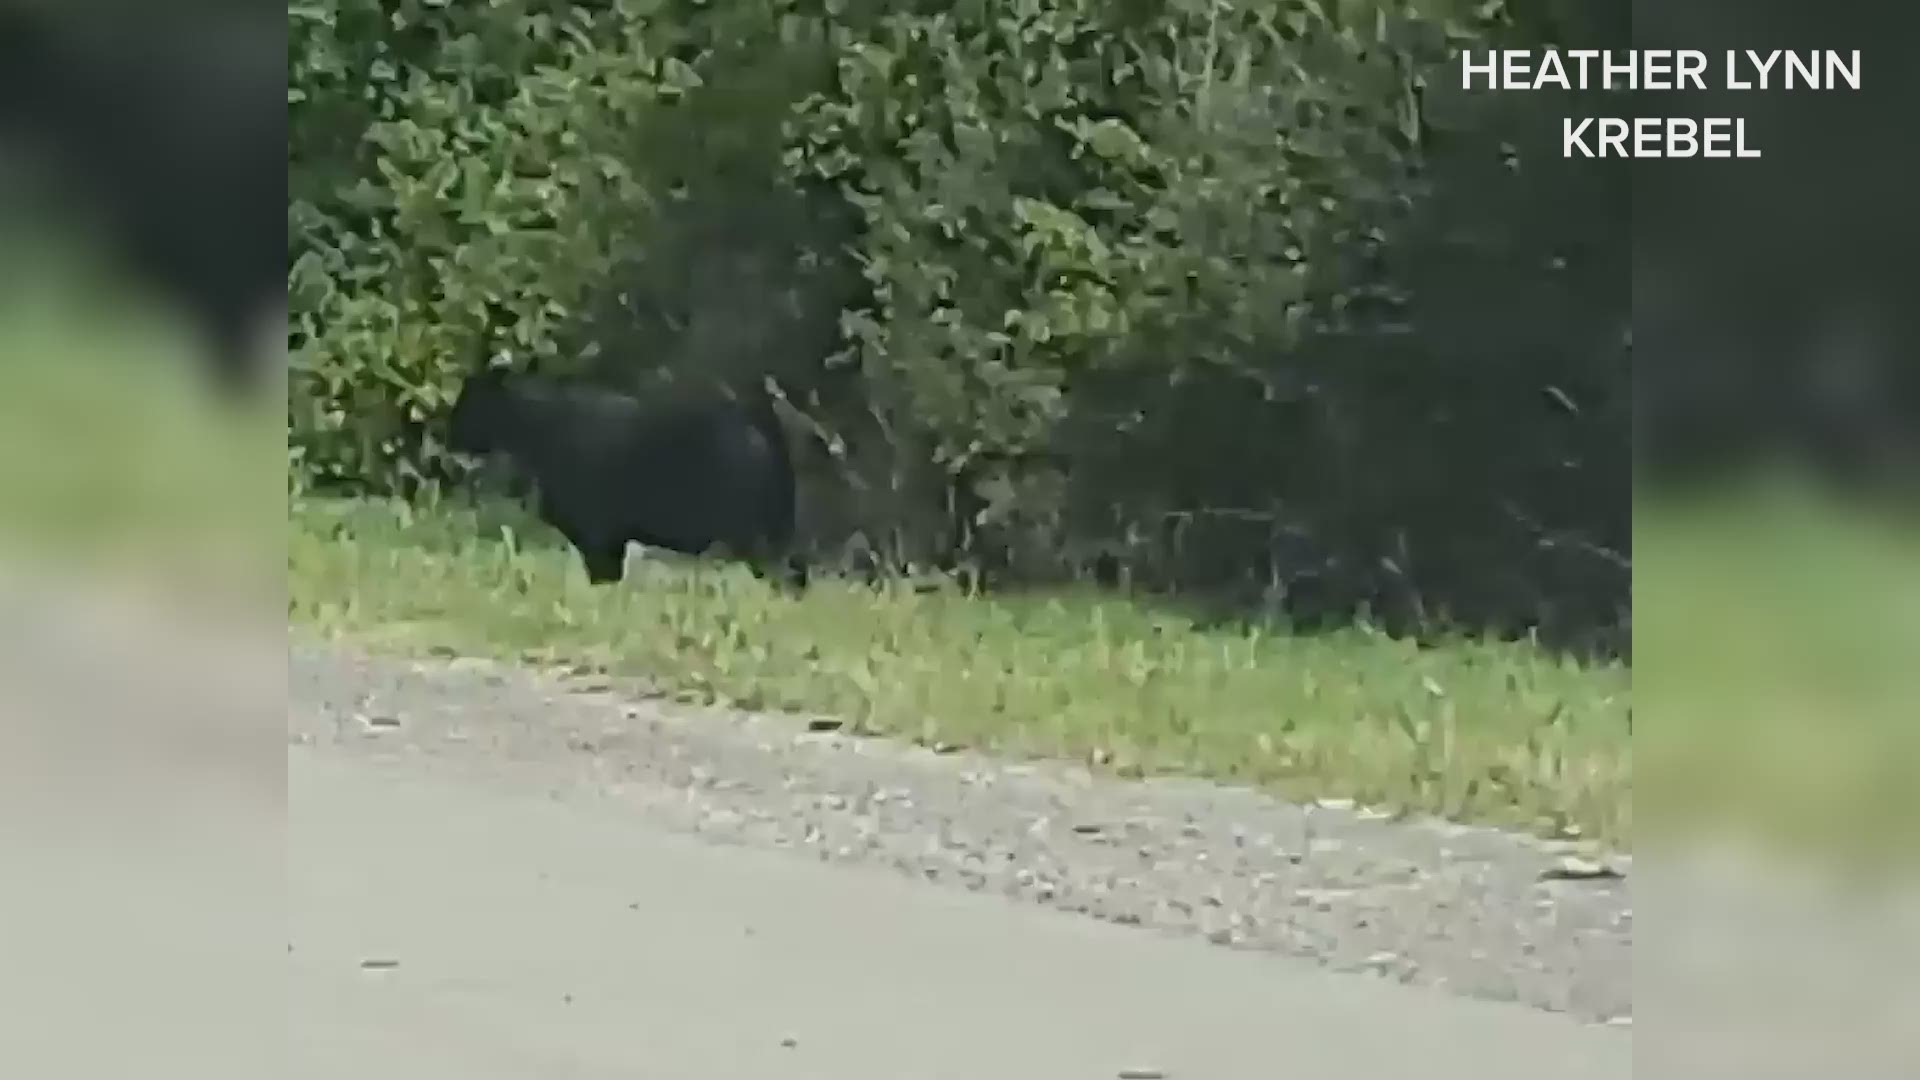 The police were able to get the bull off to the side of the road where the owners picked it up.